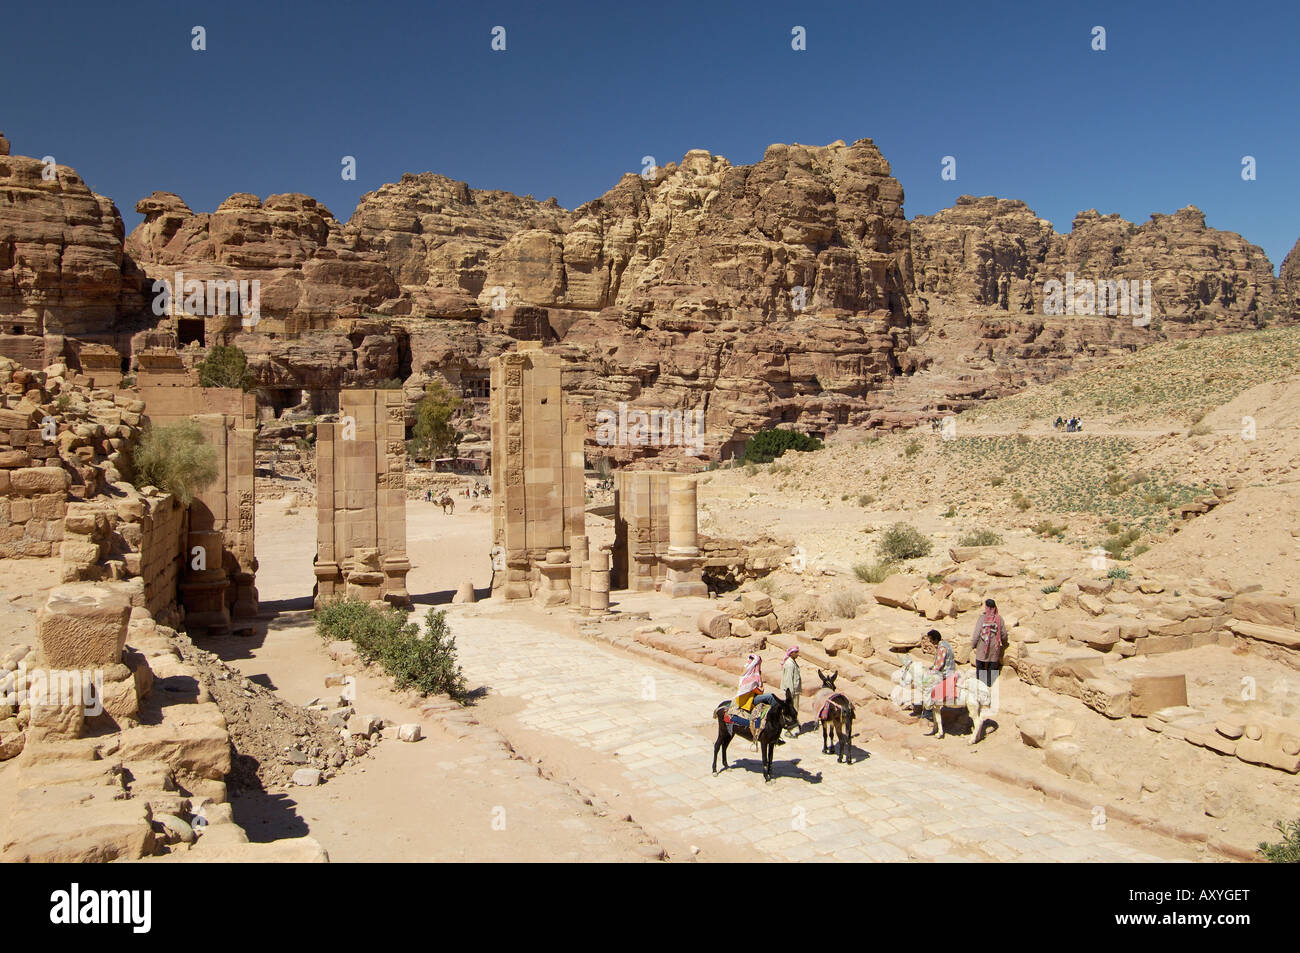 The Arched Gate, Petra, UNESCO World Heritage Site, Jordan, Middle East Stock Photo